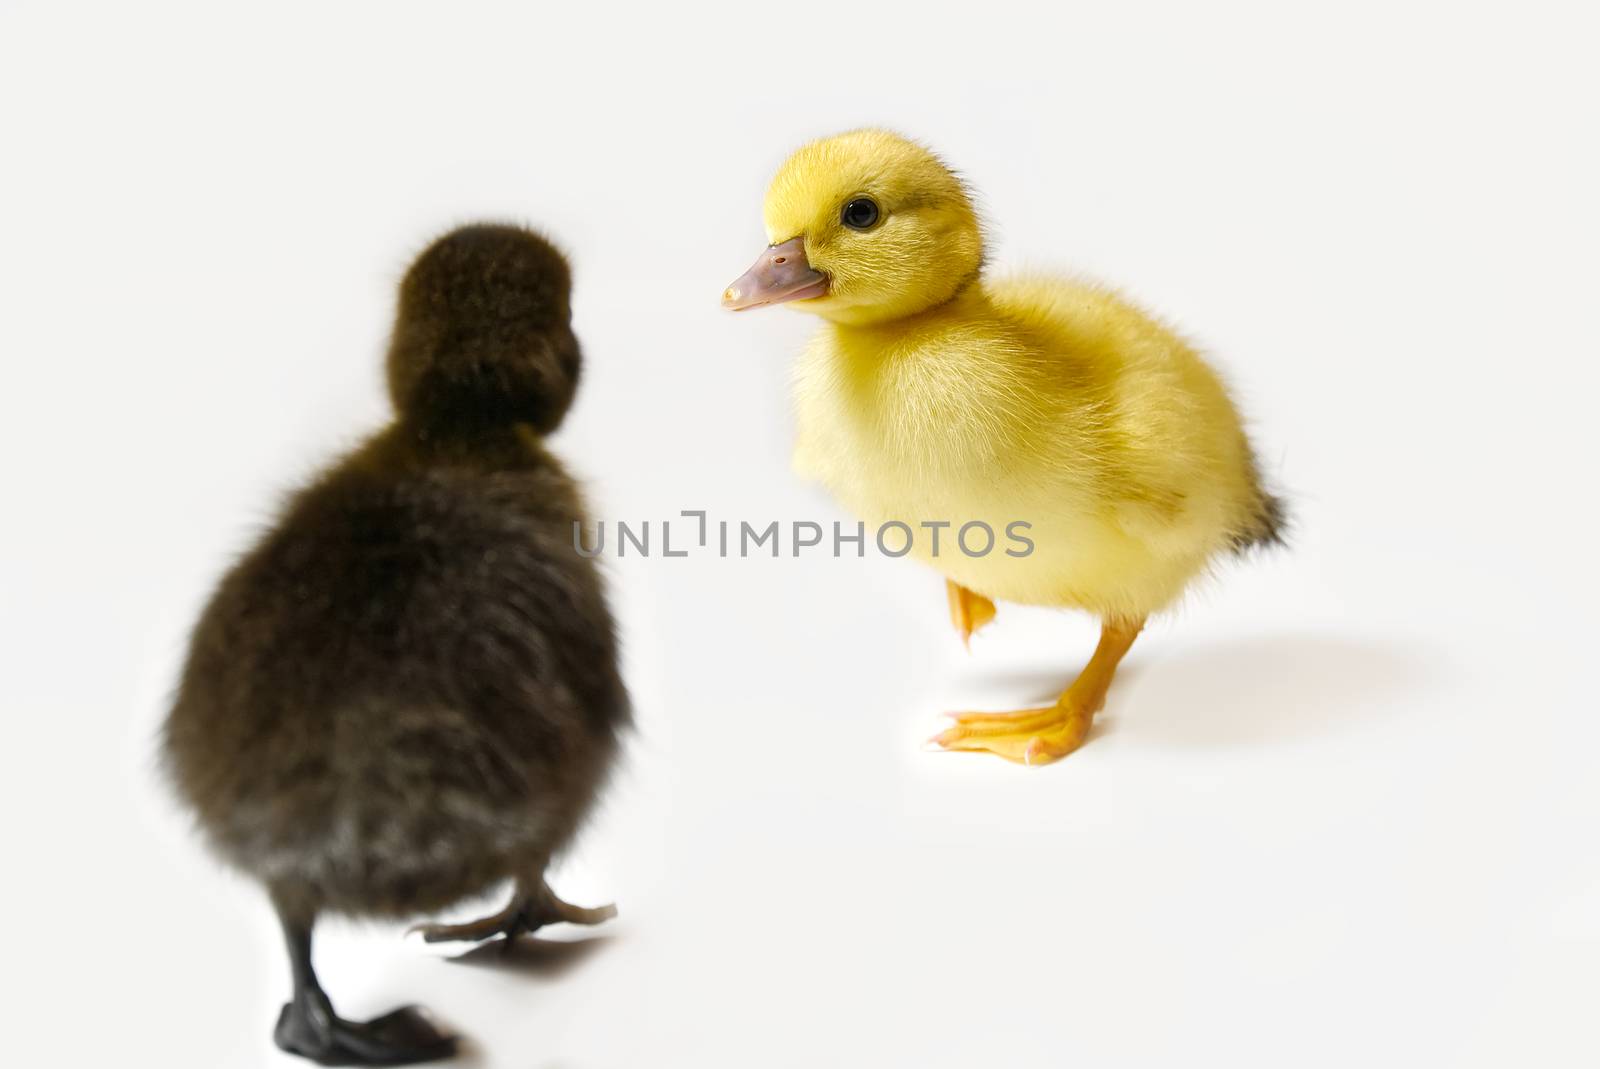 Yellow and Brown newborn duckling closeup on white background